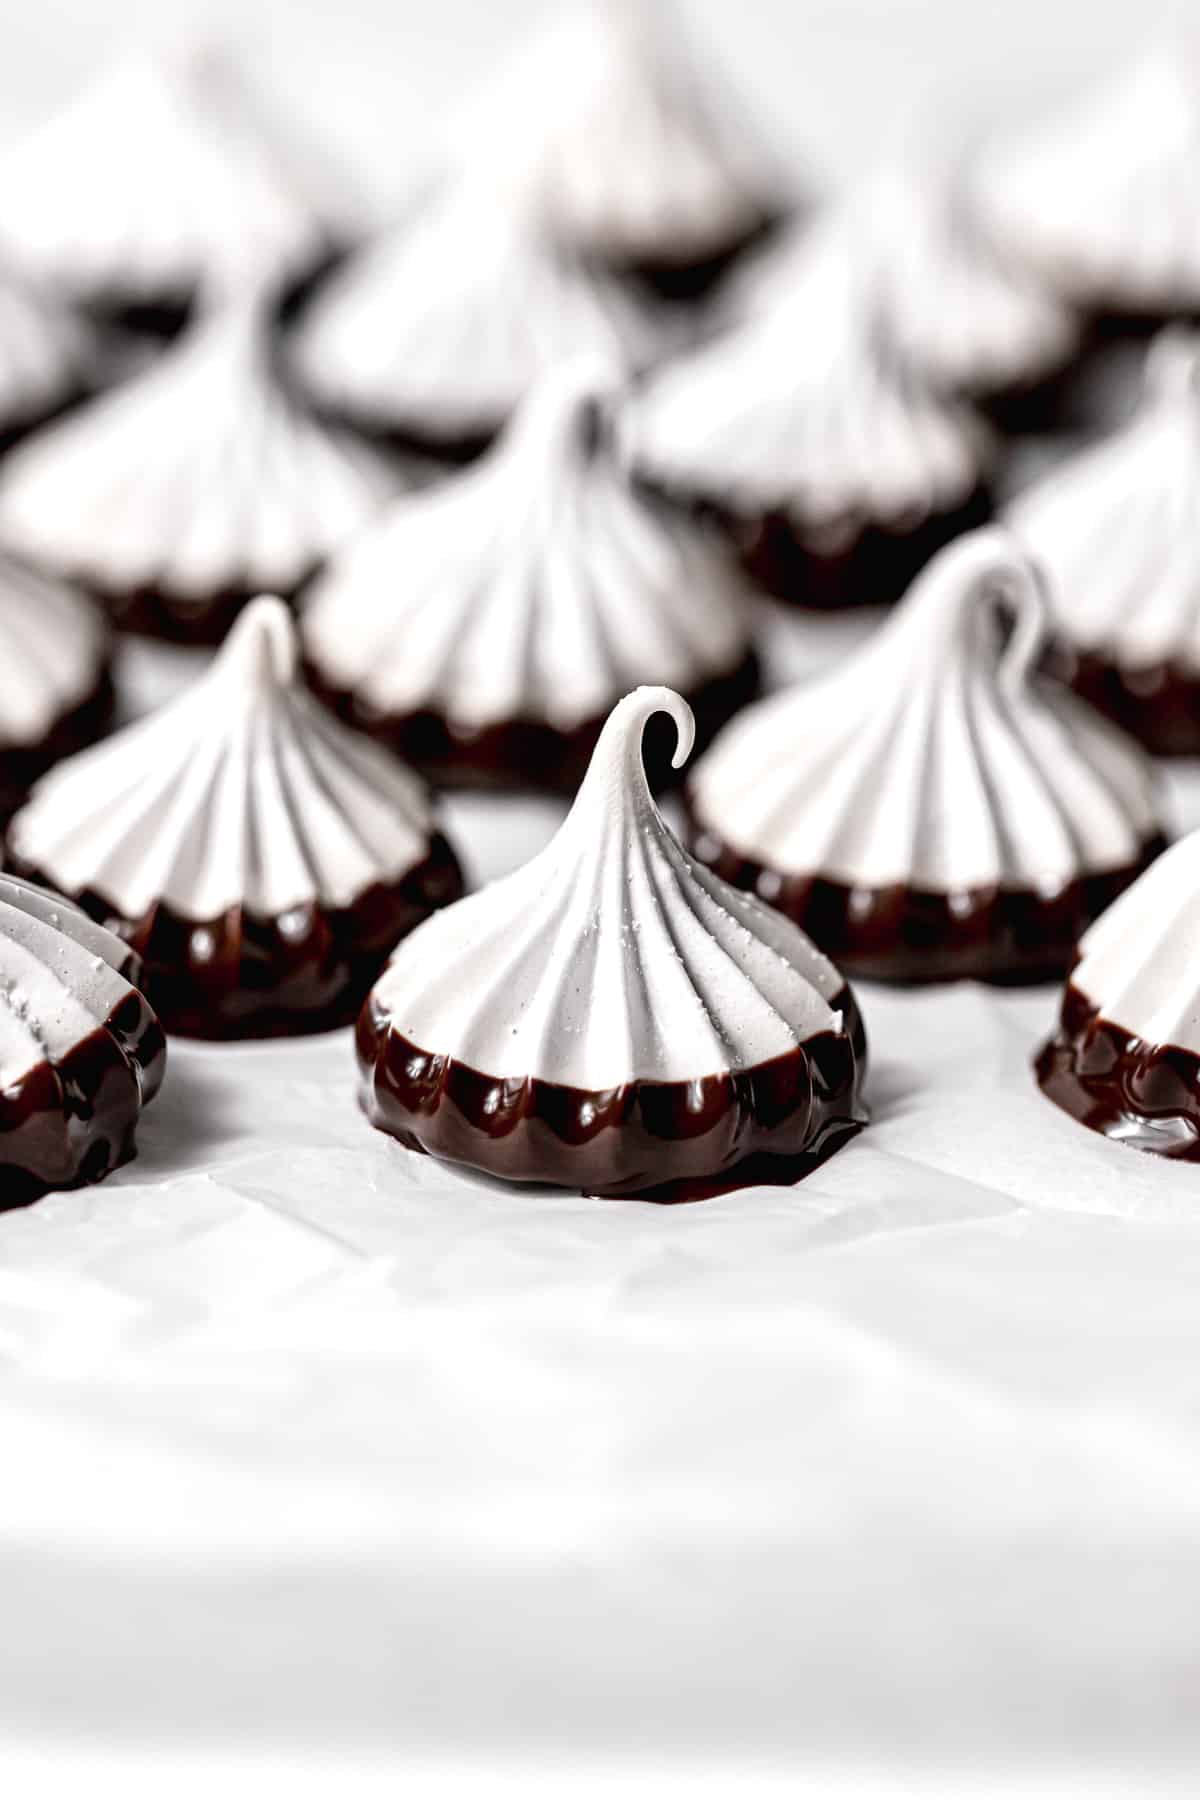 chocolate dipped meringue cookies on parchment paper